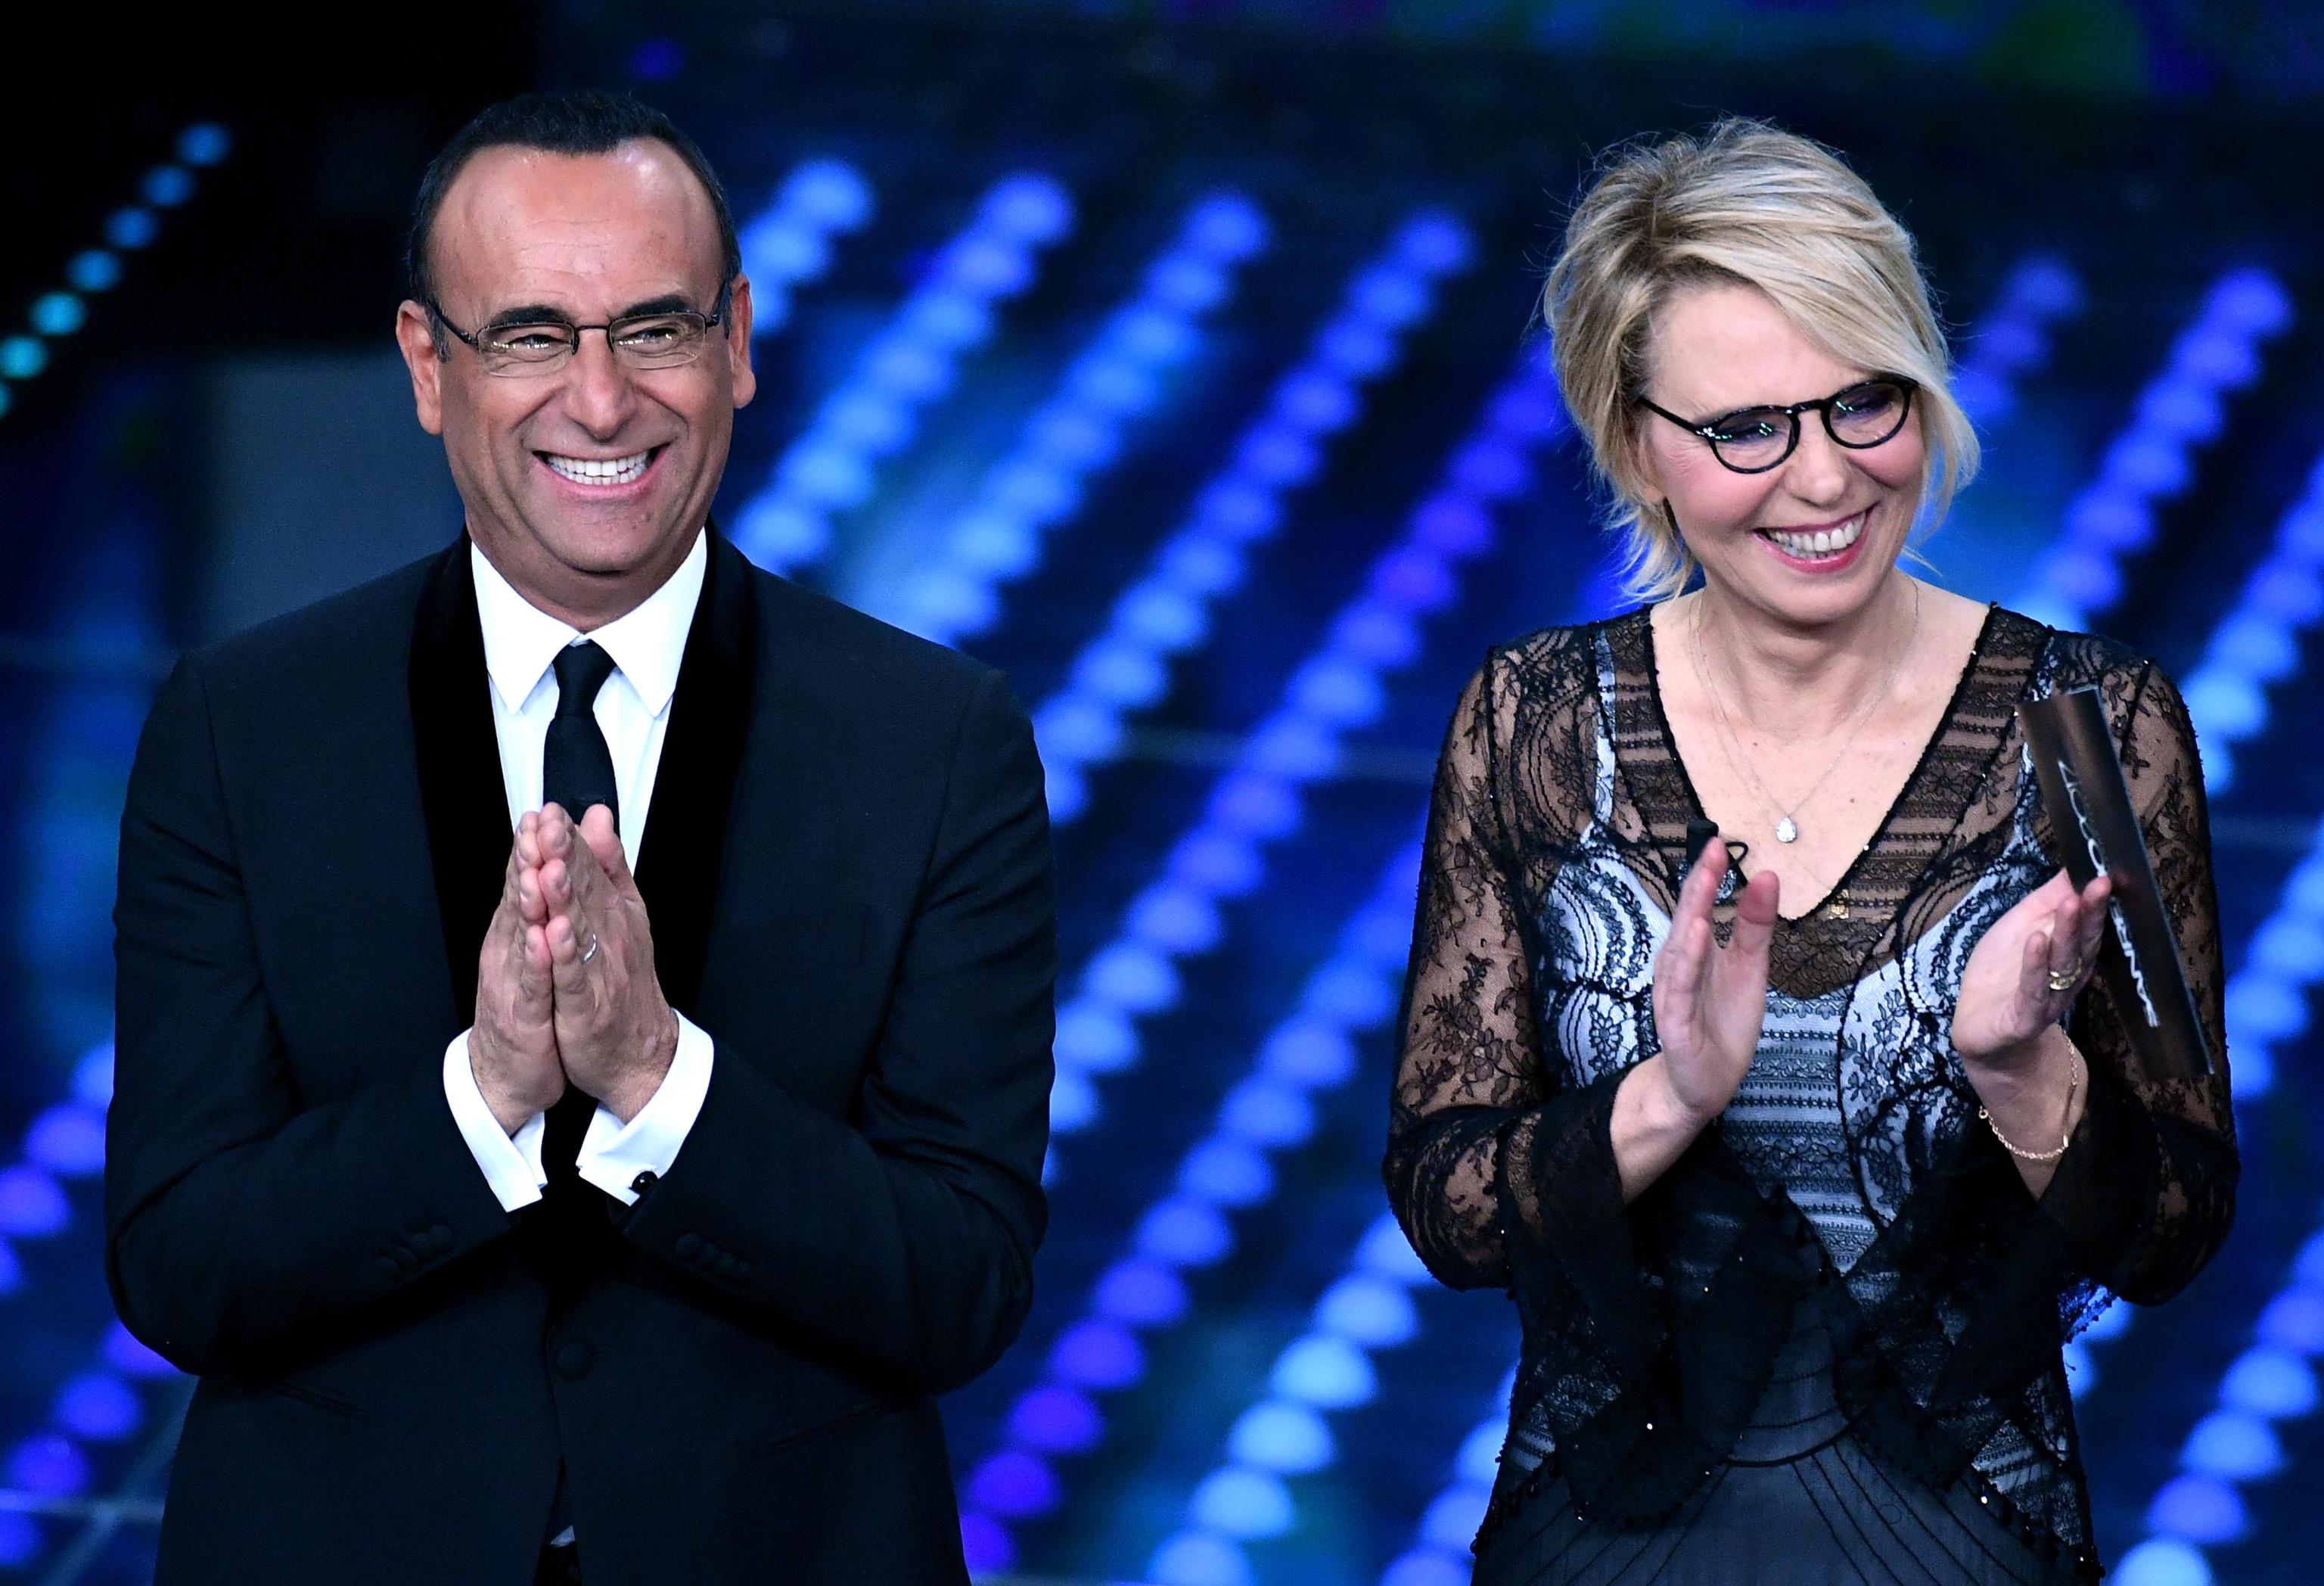 talian hosts Carlo Conti and Maria De Filippi on stage during the 67th Festival of the Italian Song of Sanremo at the Ariston theater in Sanremo, Italy, 10 February 2017. The 67th edition of the television song contest runs from 07 to 11 February.     ANSA/ETTORE FERRARI